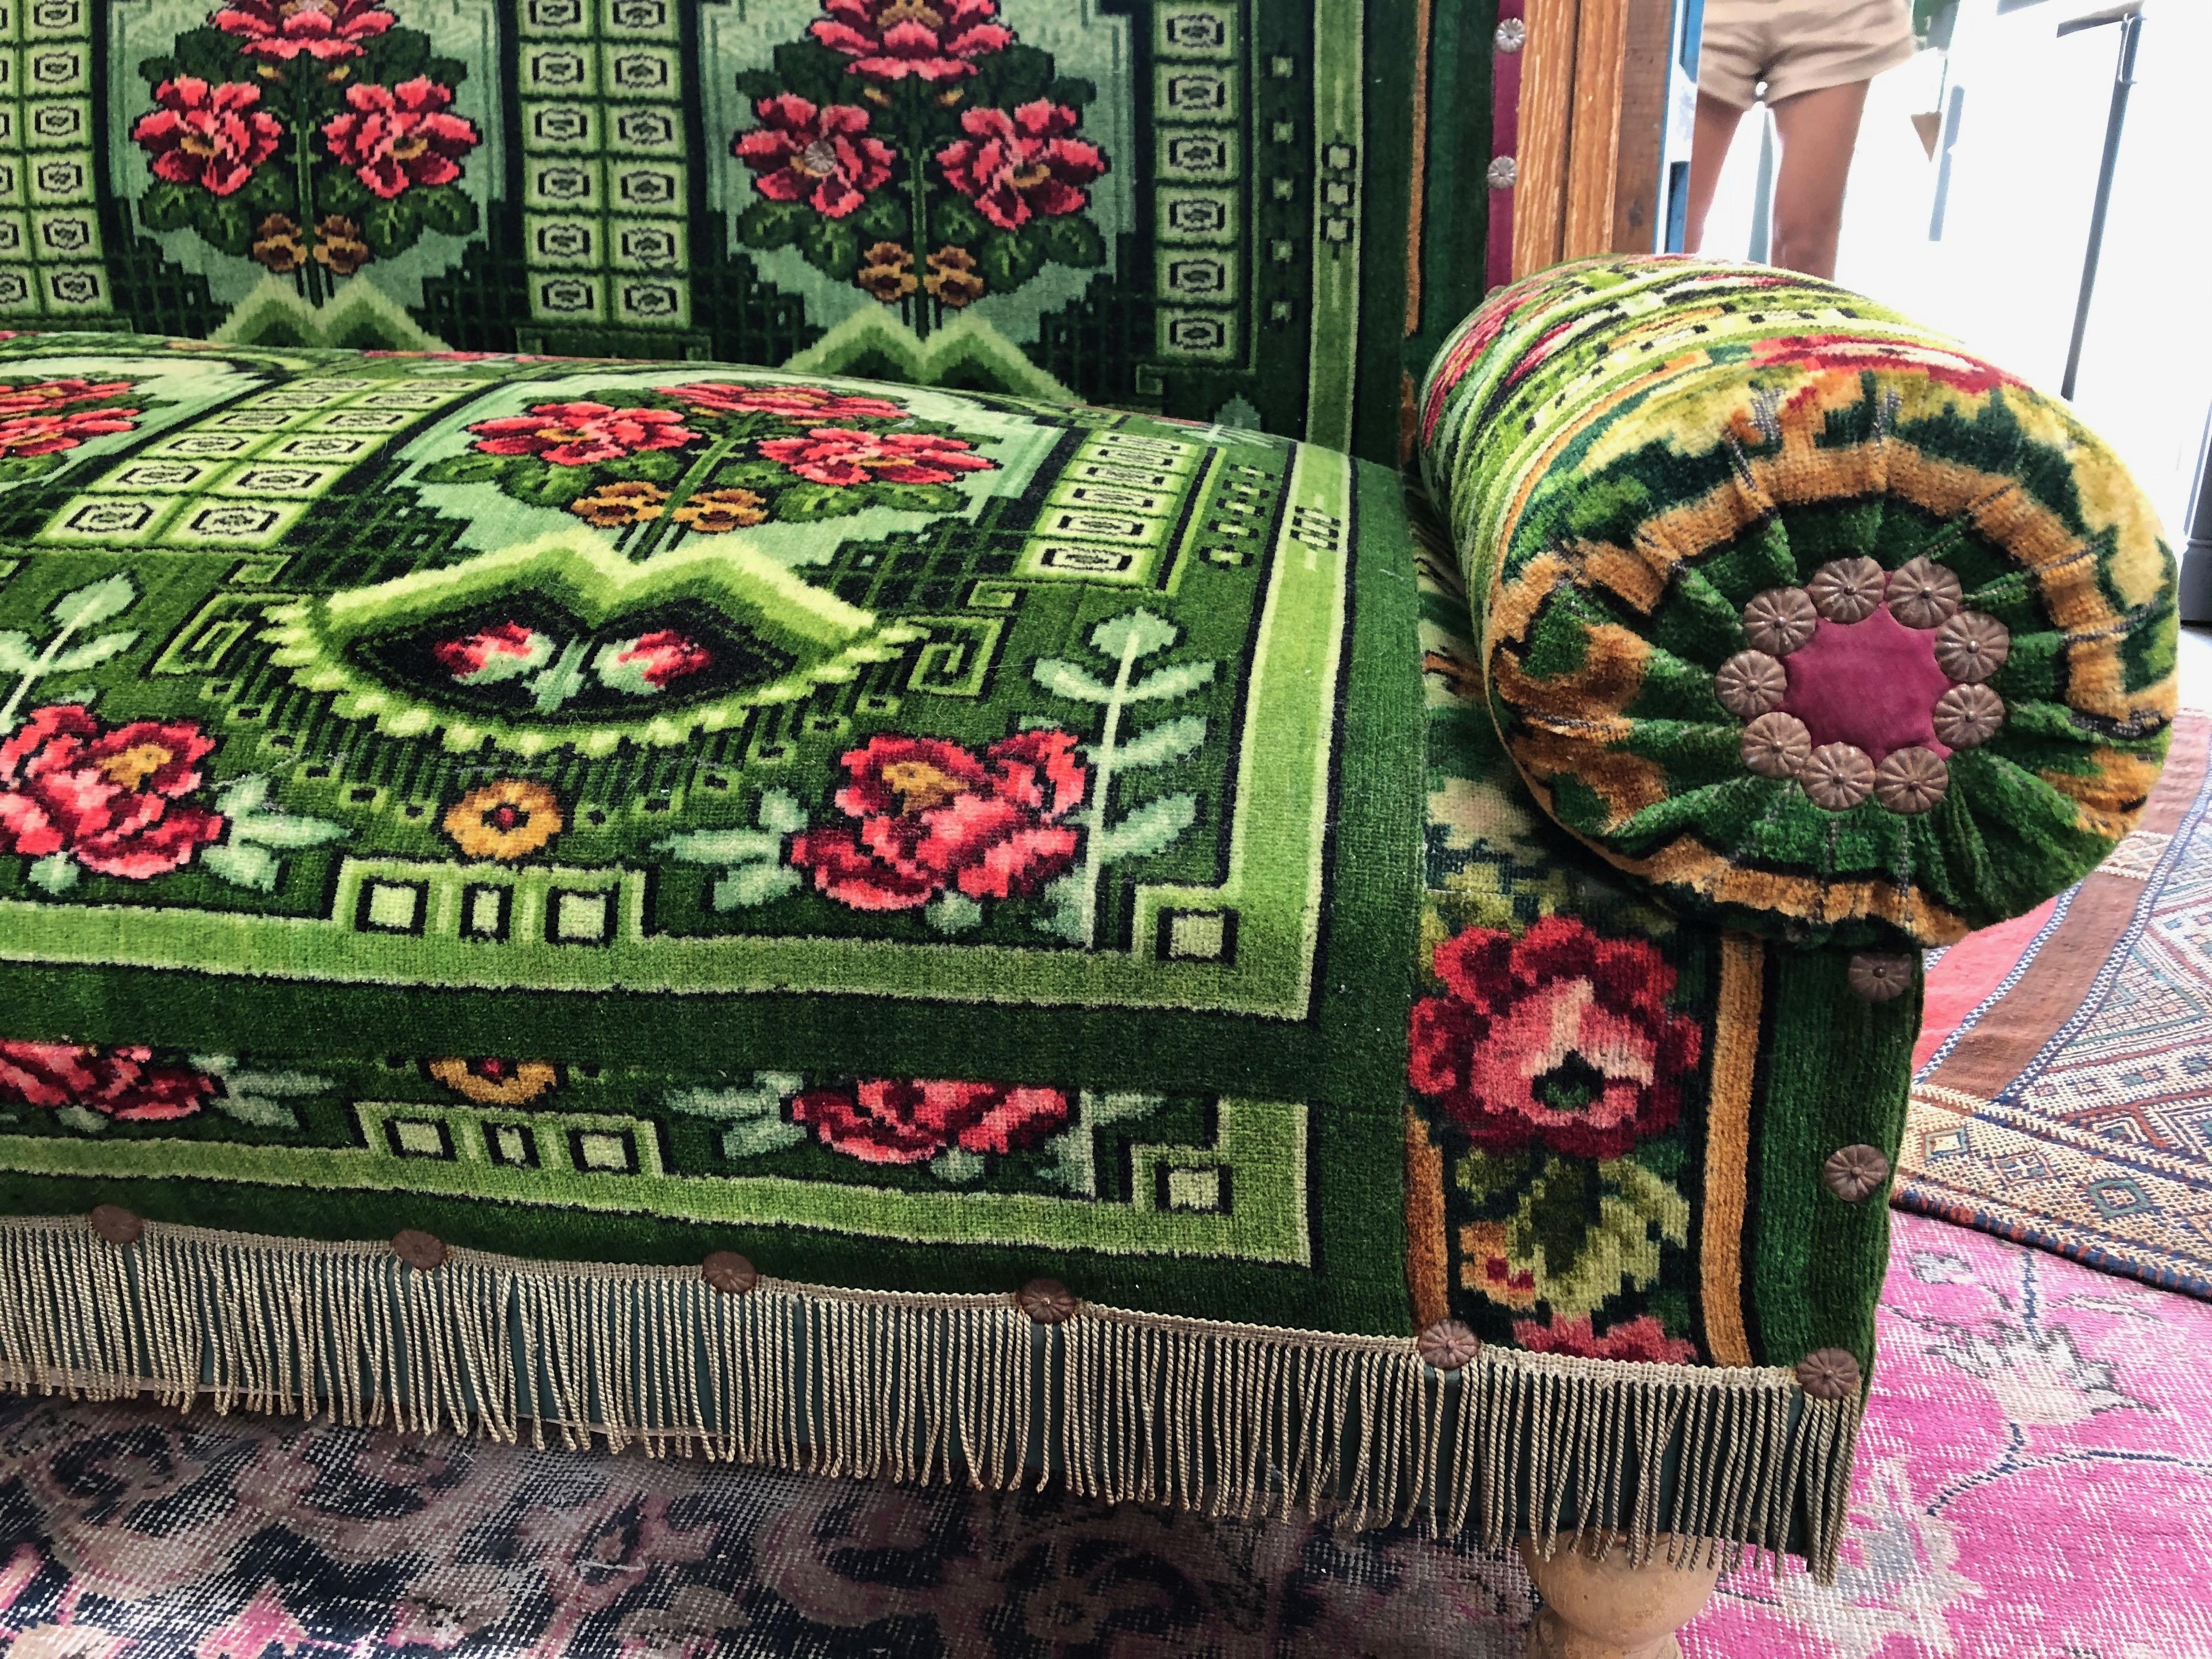 This antique French floral settee is upholstered with a vibrant green fabric featuring a floral pattern and embellishments, adding elegance and classic beauty to any home. Arms and backing are both removable which makes storing and rearranging